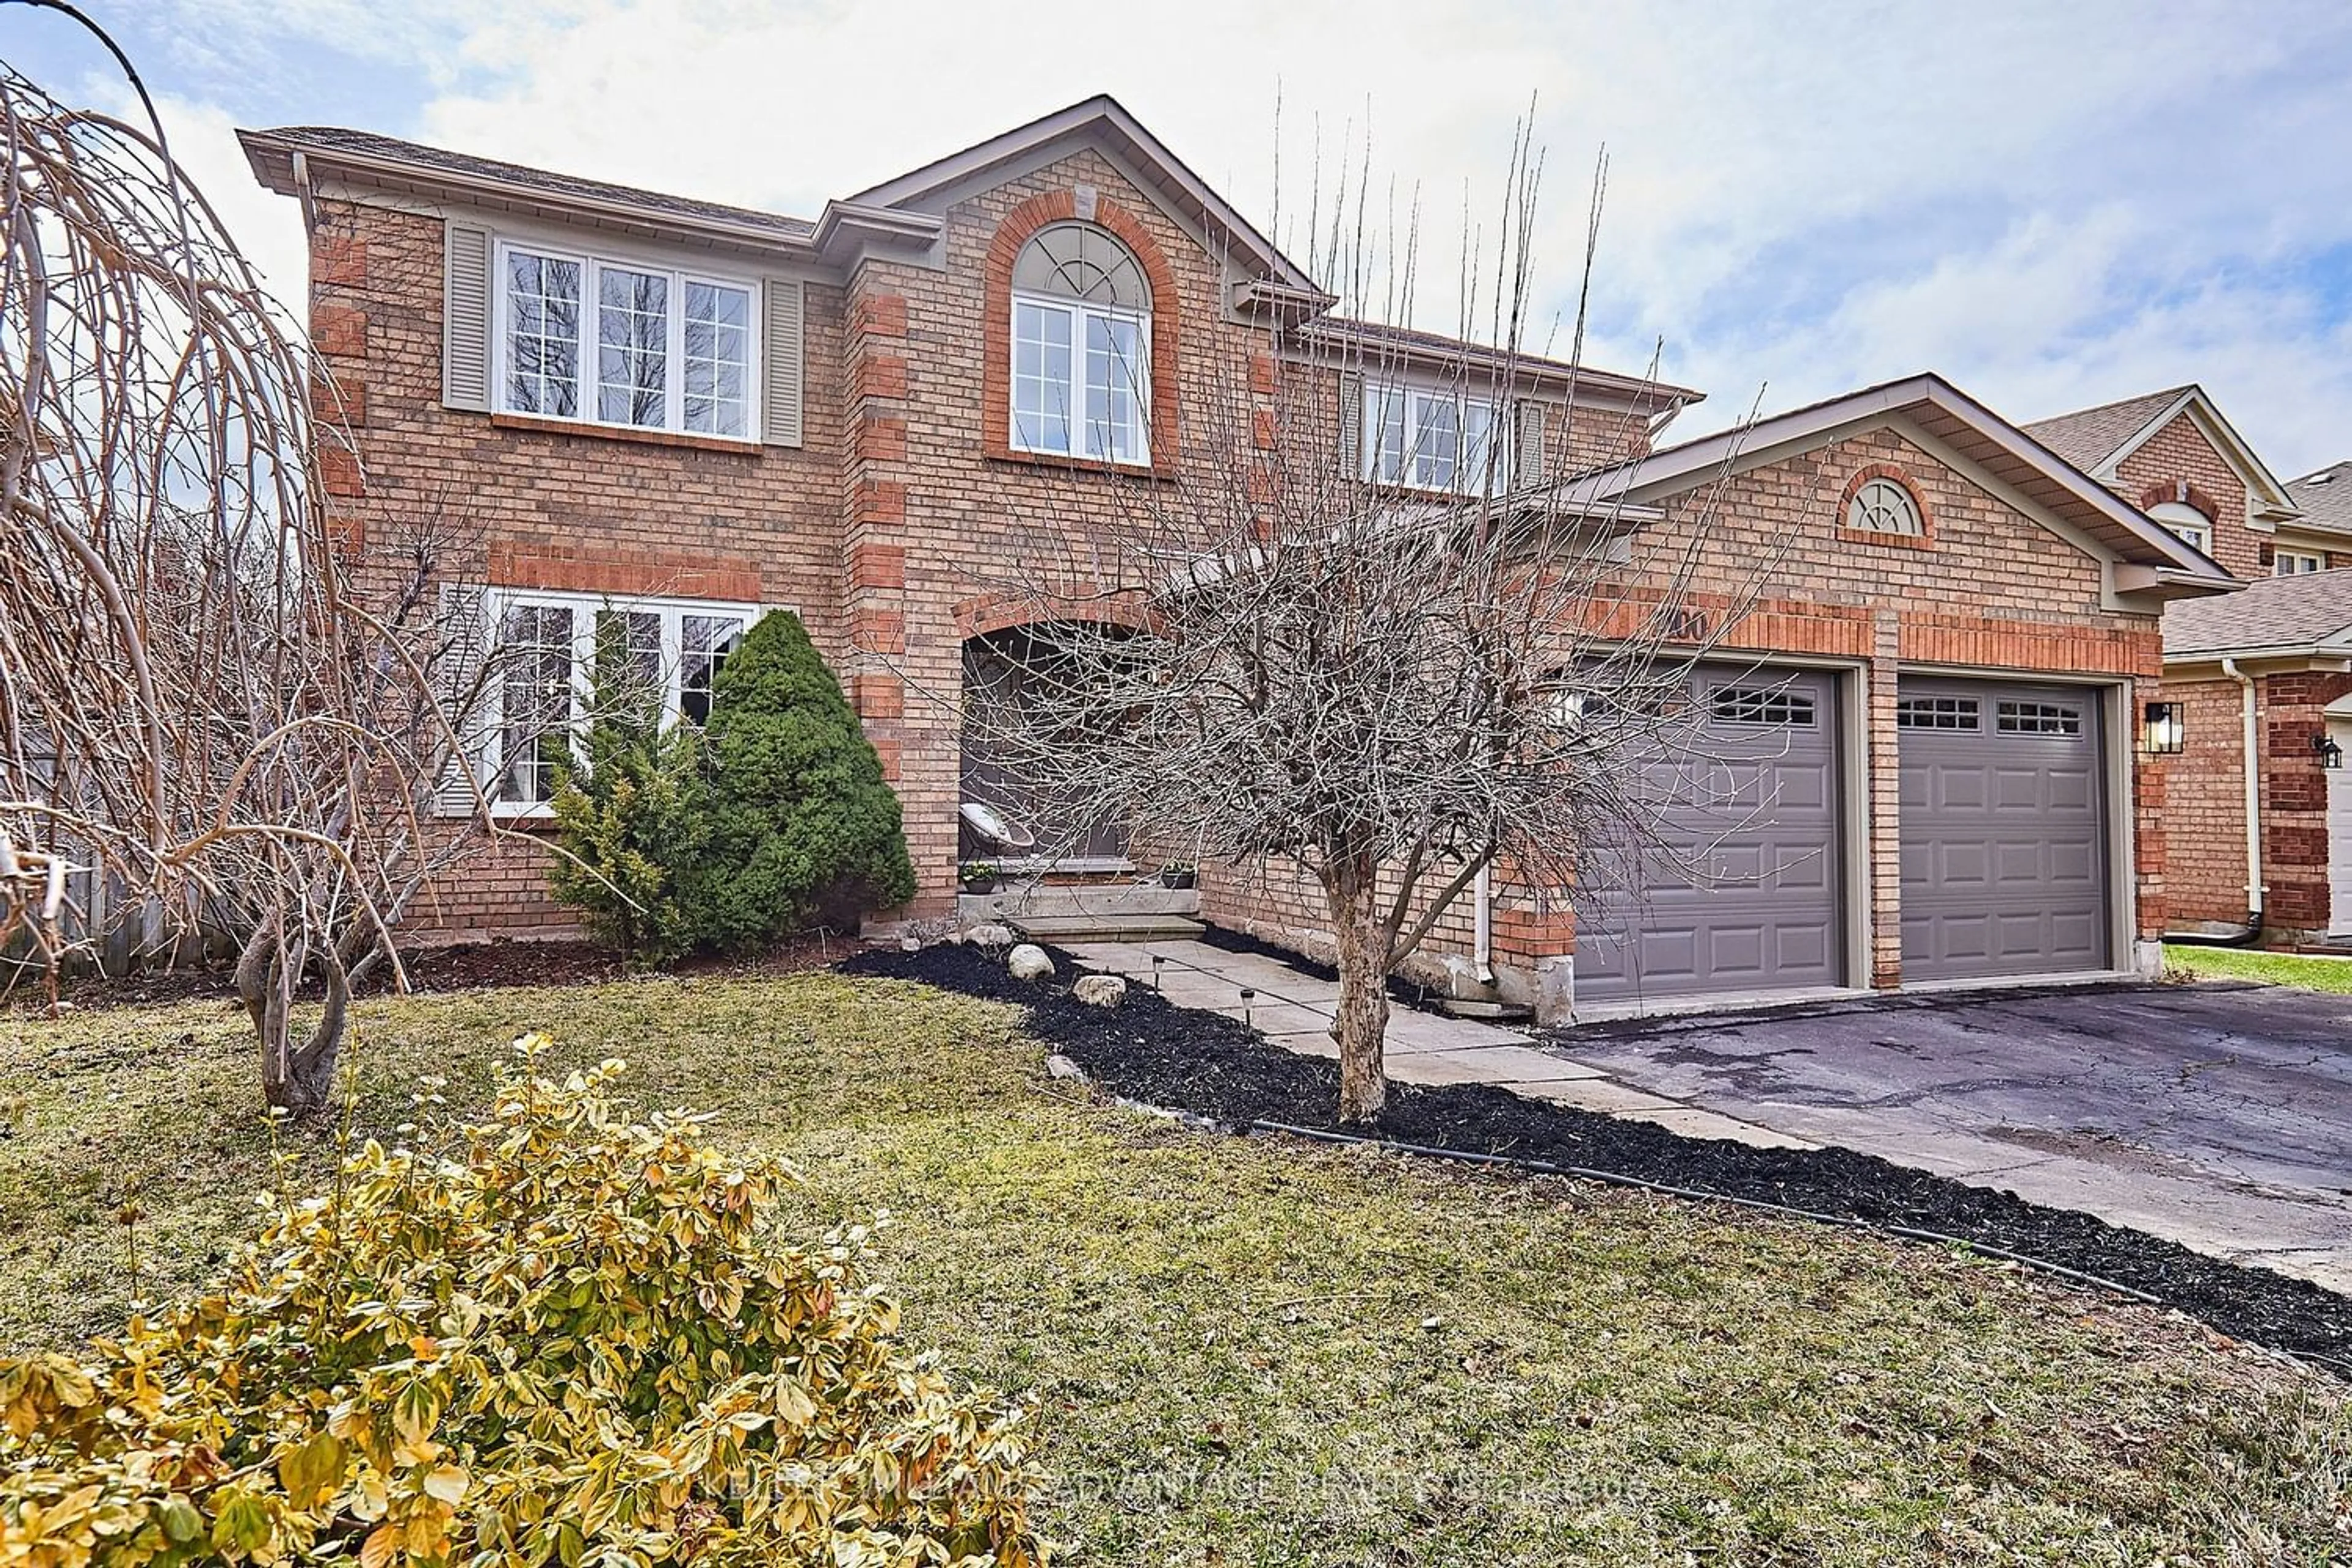 Home with brick exterior material for 2100 Schoolmaster Circ, Oakville Ontario L6M 3A2